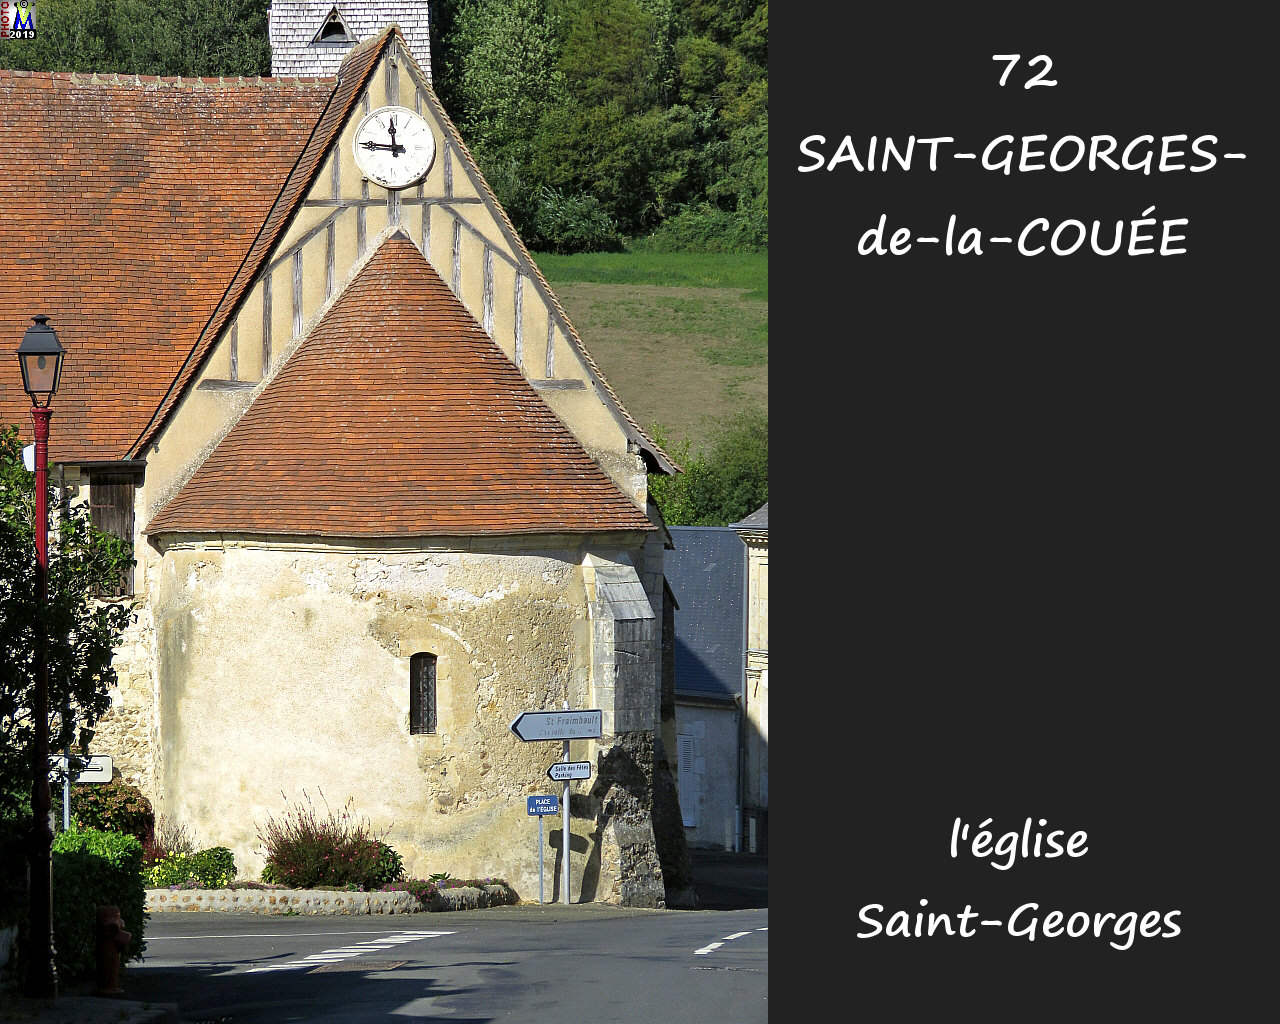 72StGEORGES-COUEE_eglise_108.jpg